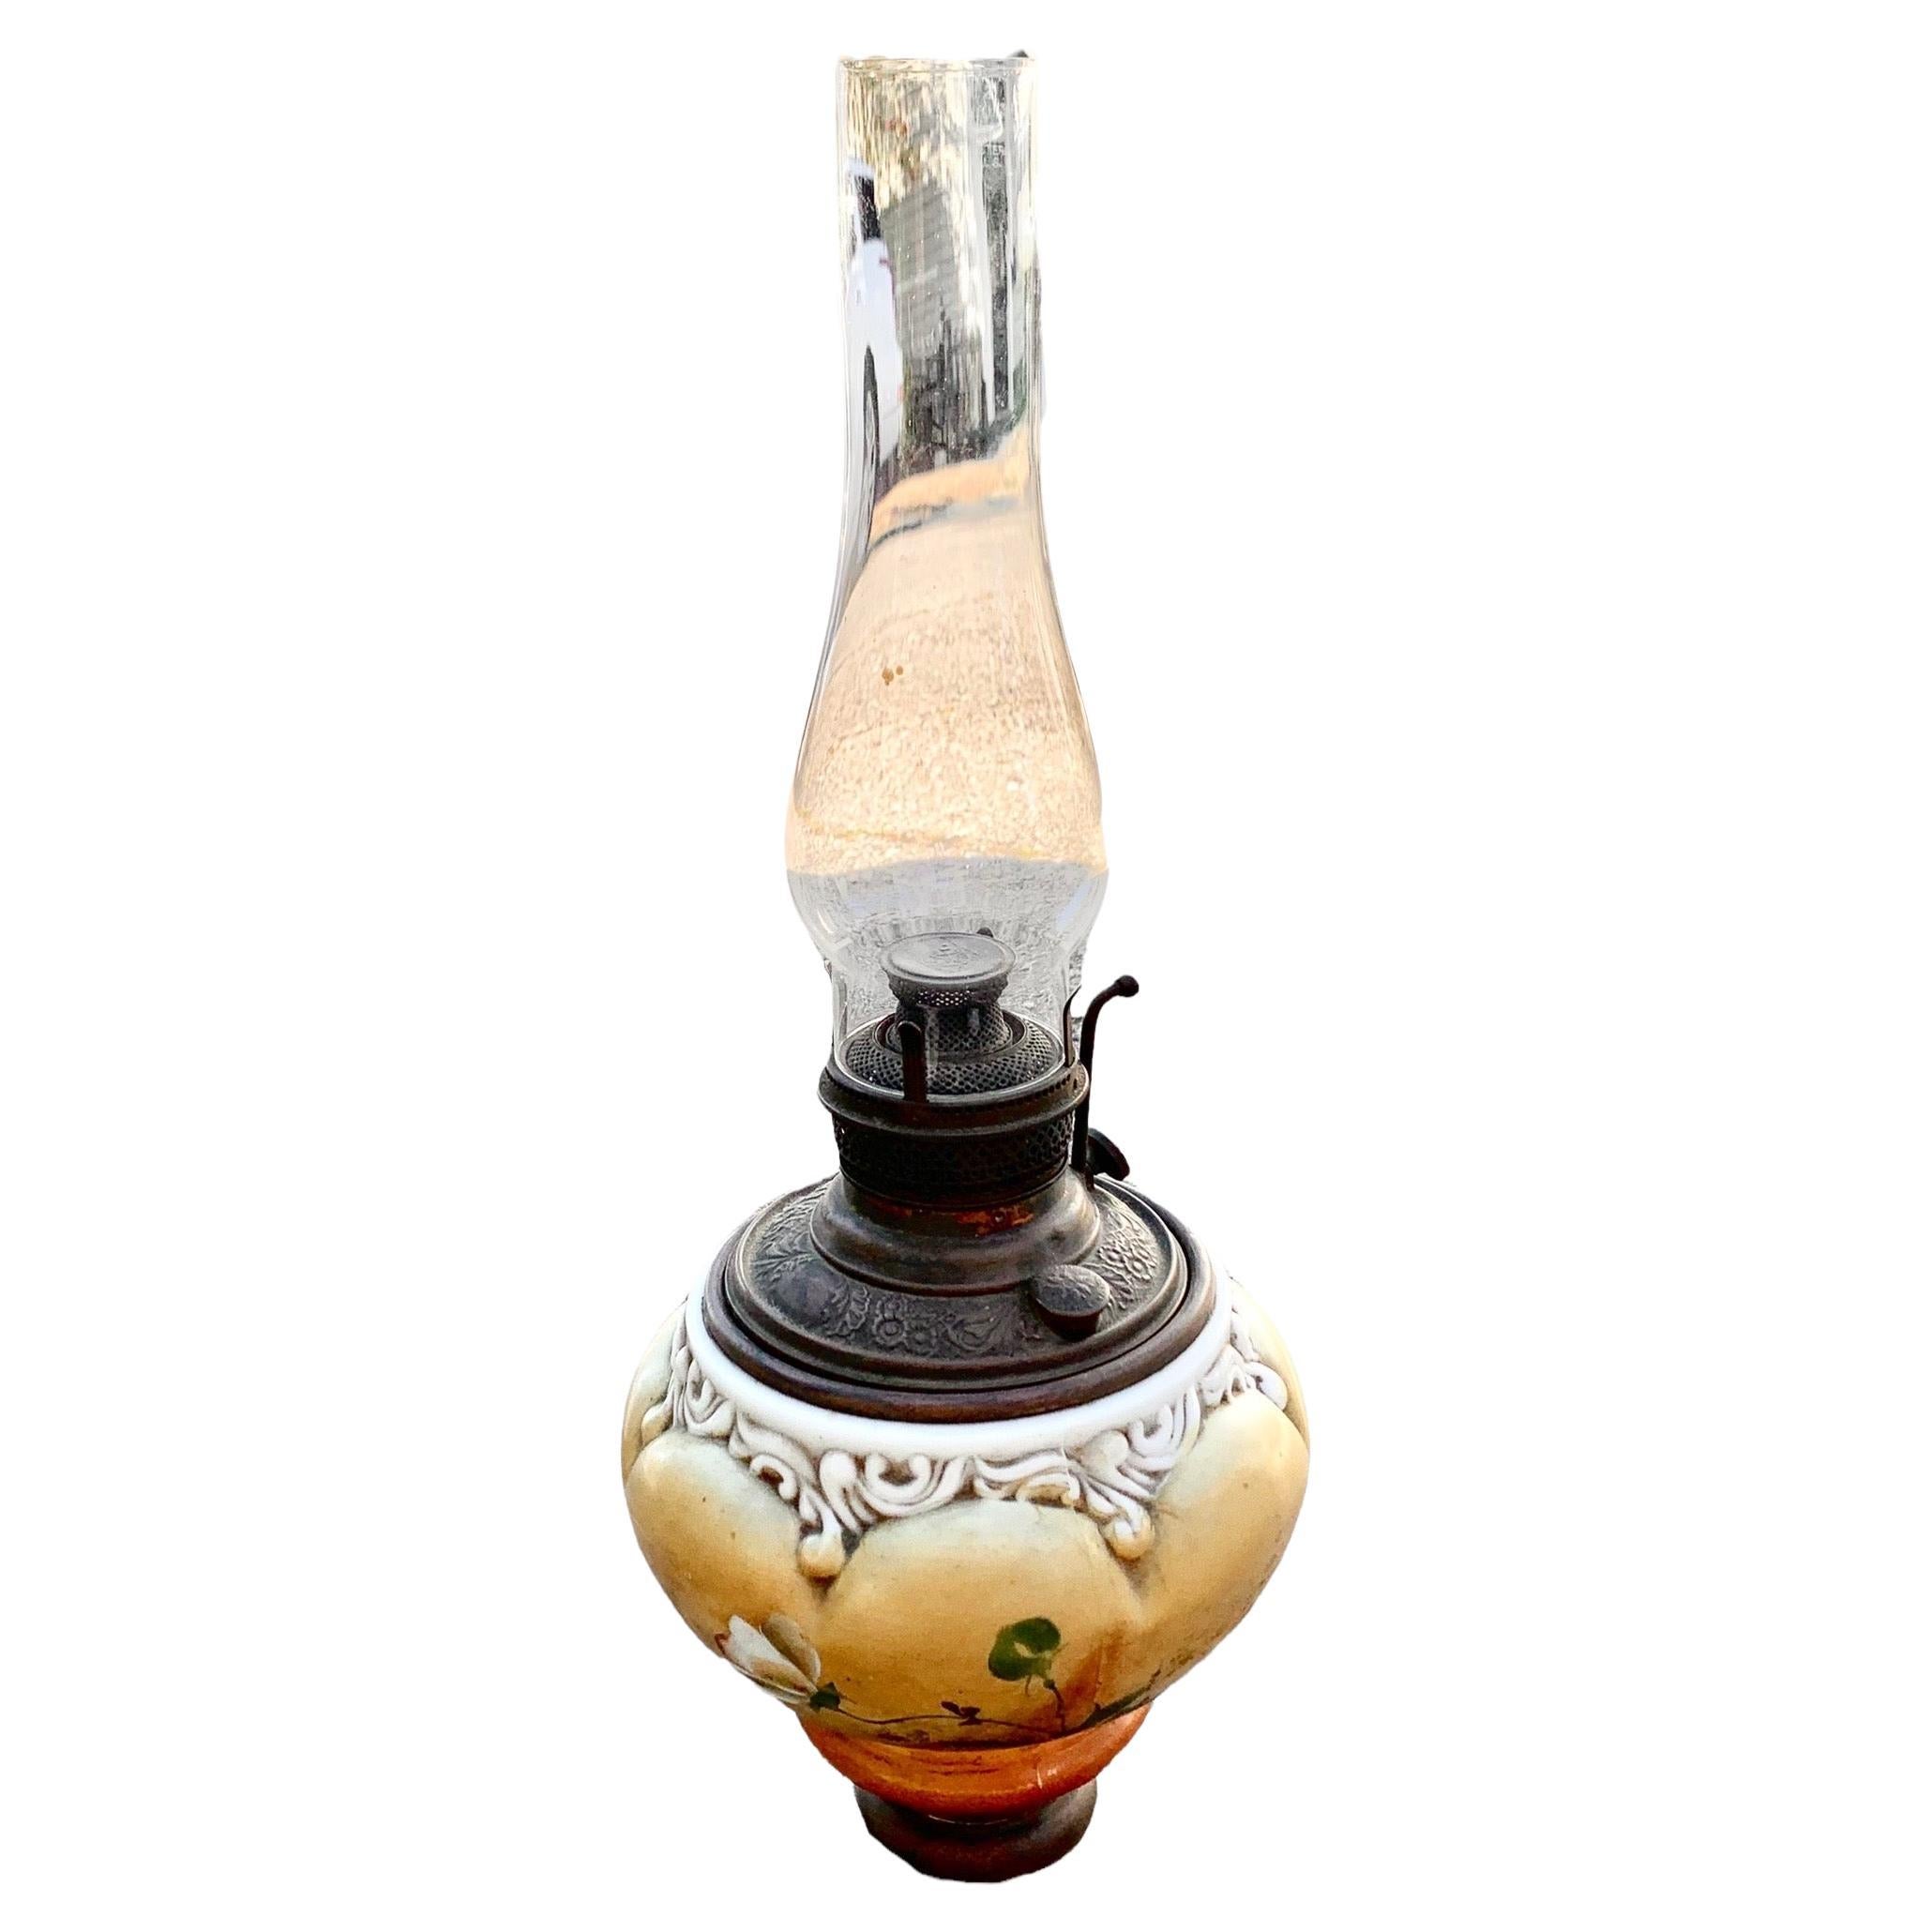 An American Victorian oil lamp having an outstanding hand painted floral font, cast brass filigree base, hand blown chimney and it's original burner and parts. It is high style Victorian elegance of the late 19th century meant to be displayed in